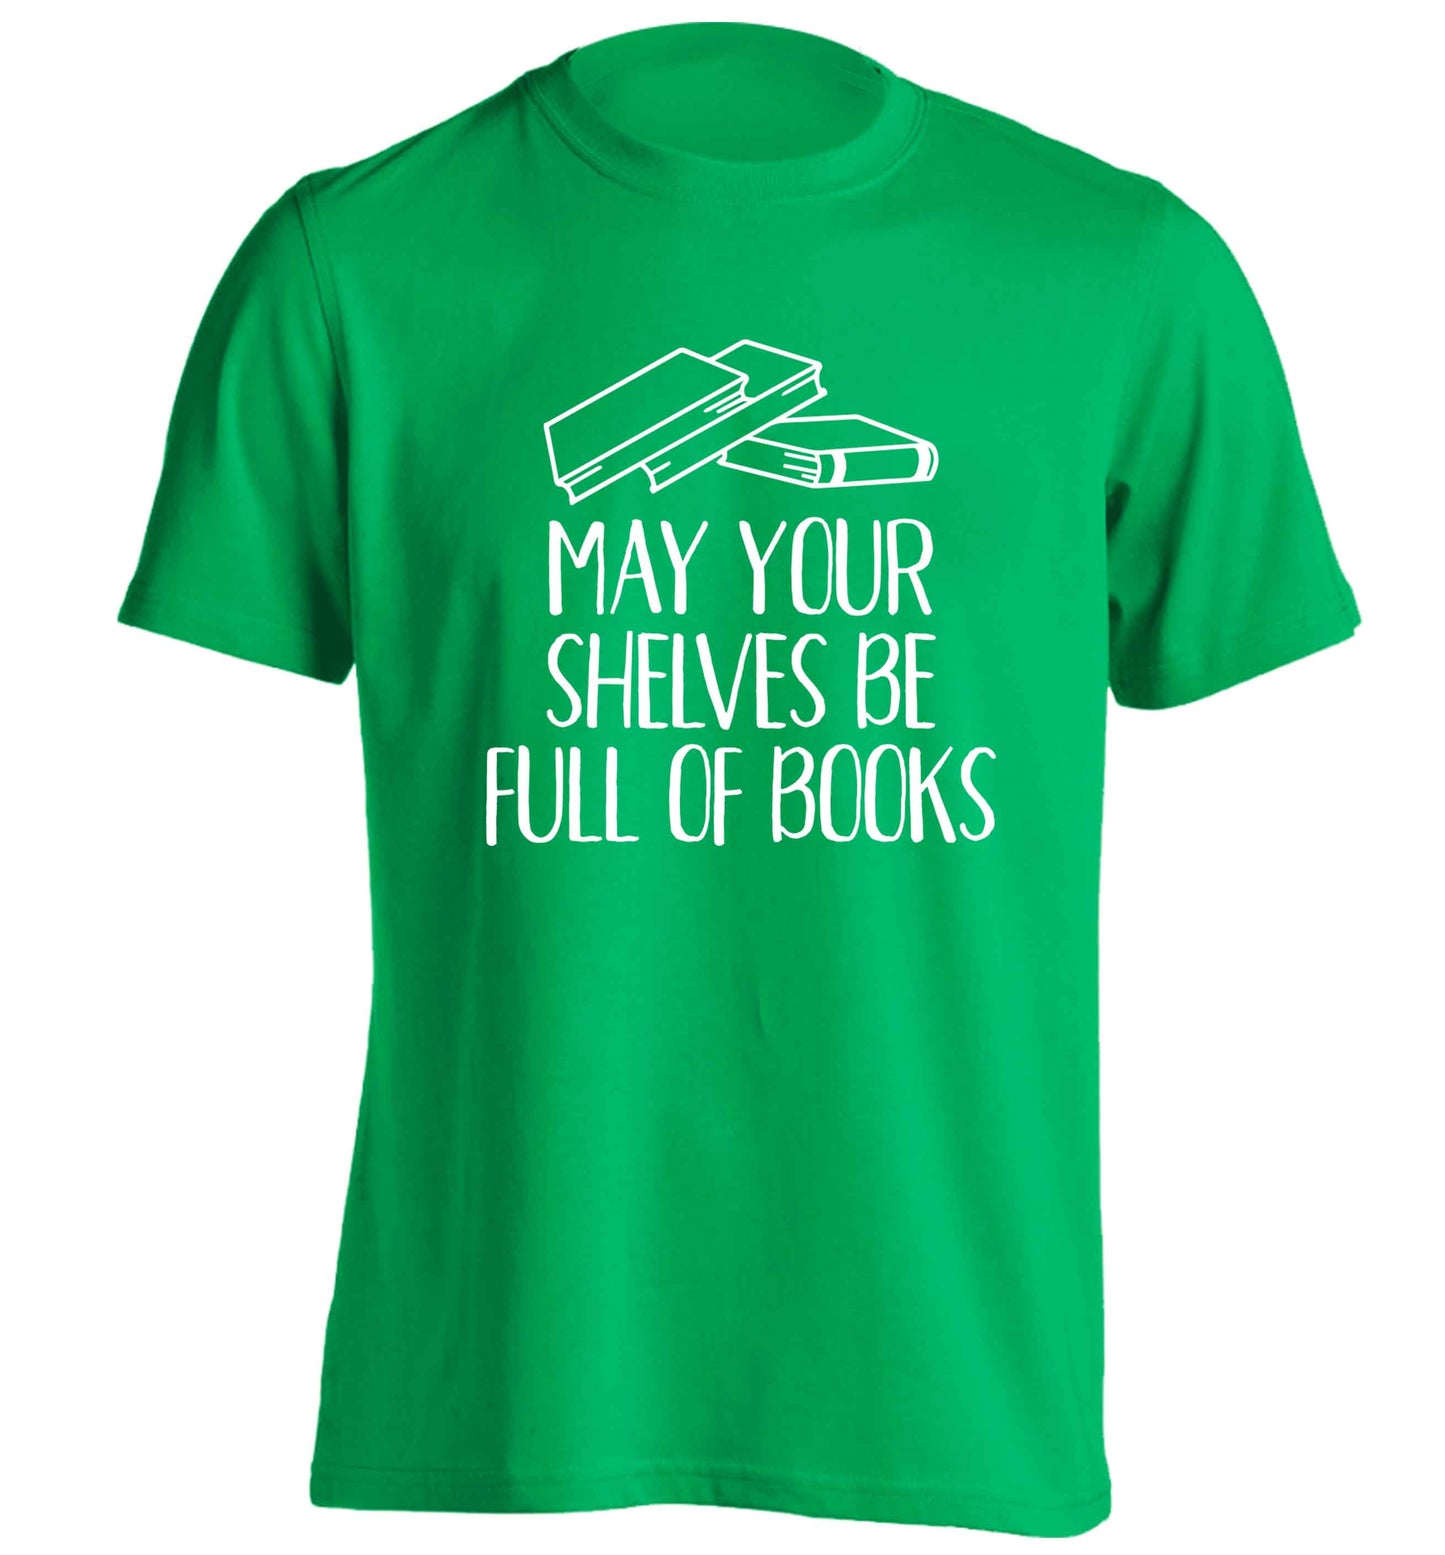 May your shelves be full of books adults unisex green Tshirt 2XL